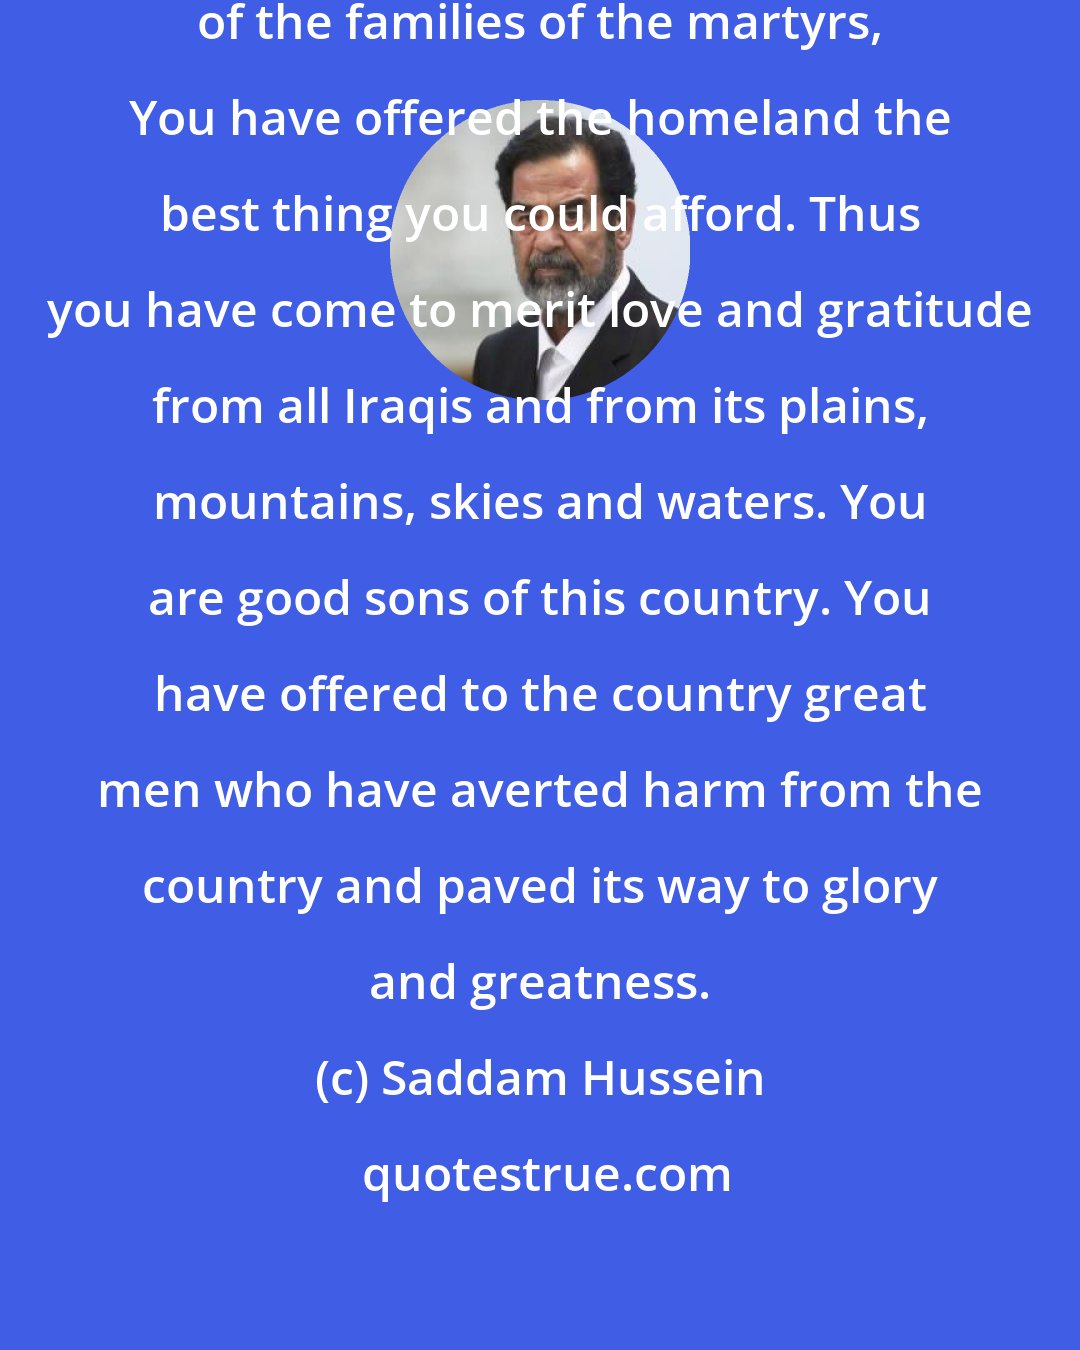 Saddam Hussein: Great Iraqi men and women, members of the families of the martyrs, You have offered the homeland the best thing you could afford. Thus you have come to merit love and gratitude from all Iraqis and from its plains, mountains, skies and waters. You are good sons of this country. You have offered to the country great men who have averted harm from the country and paved its way to glory and greatness.